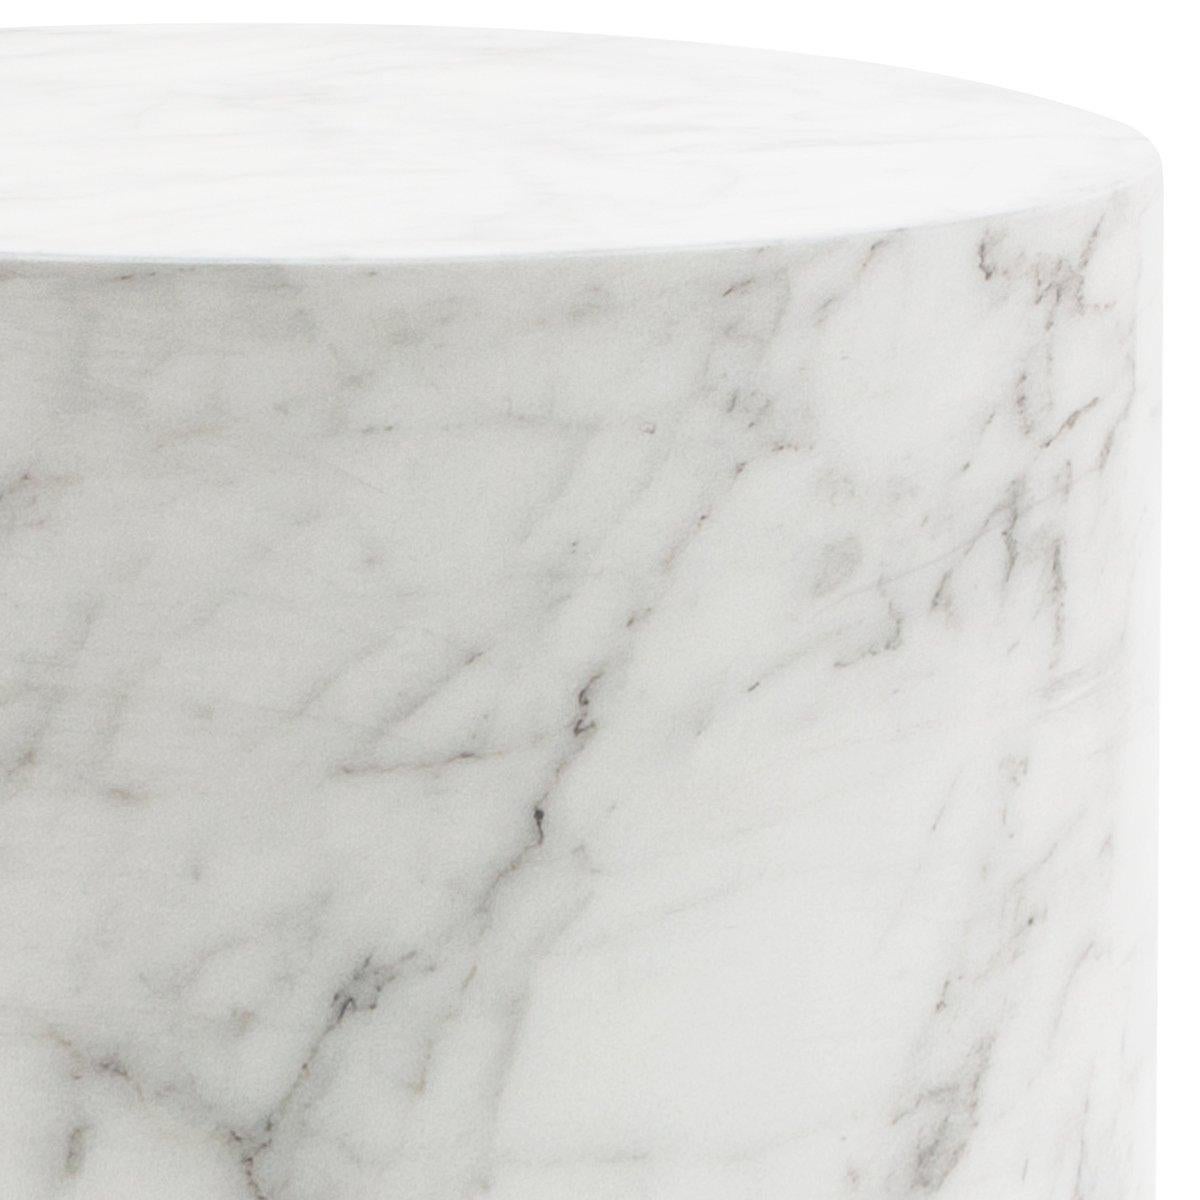 Stunning round coffee table in Carrera marble with a smooth, satin polished finish.